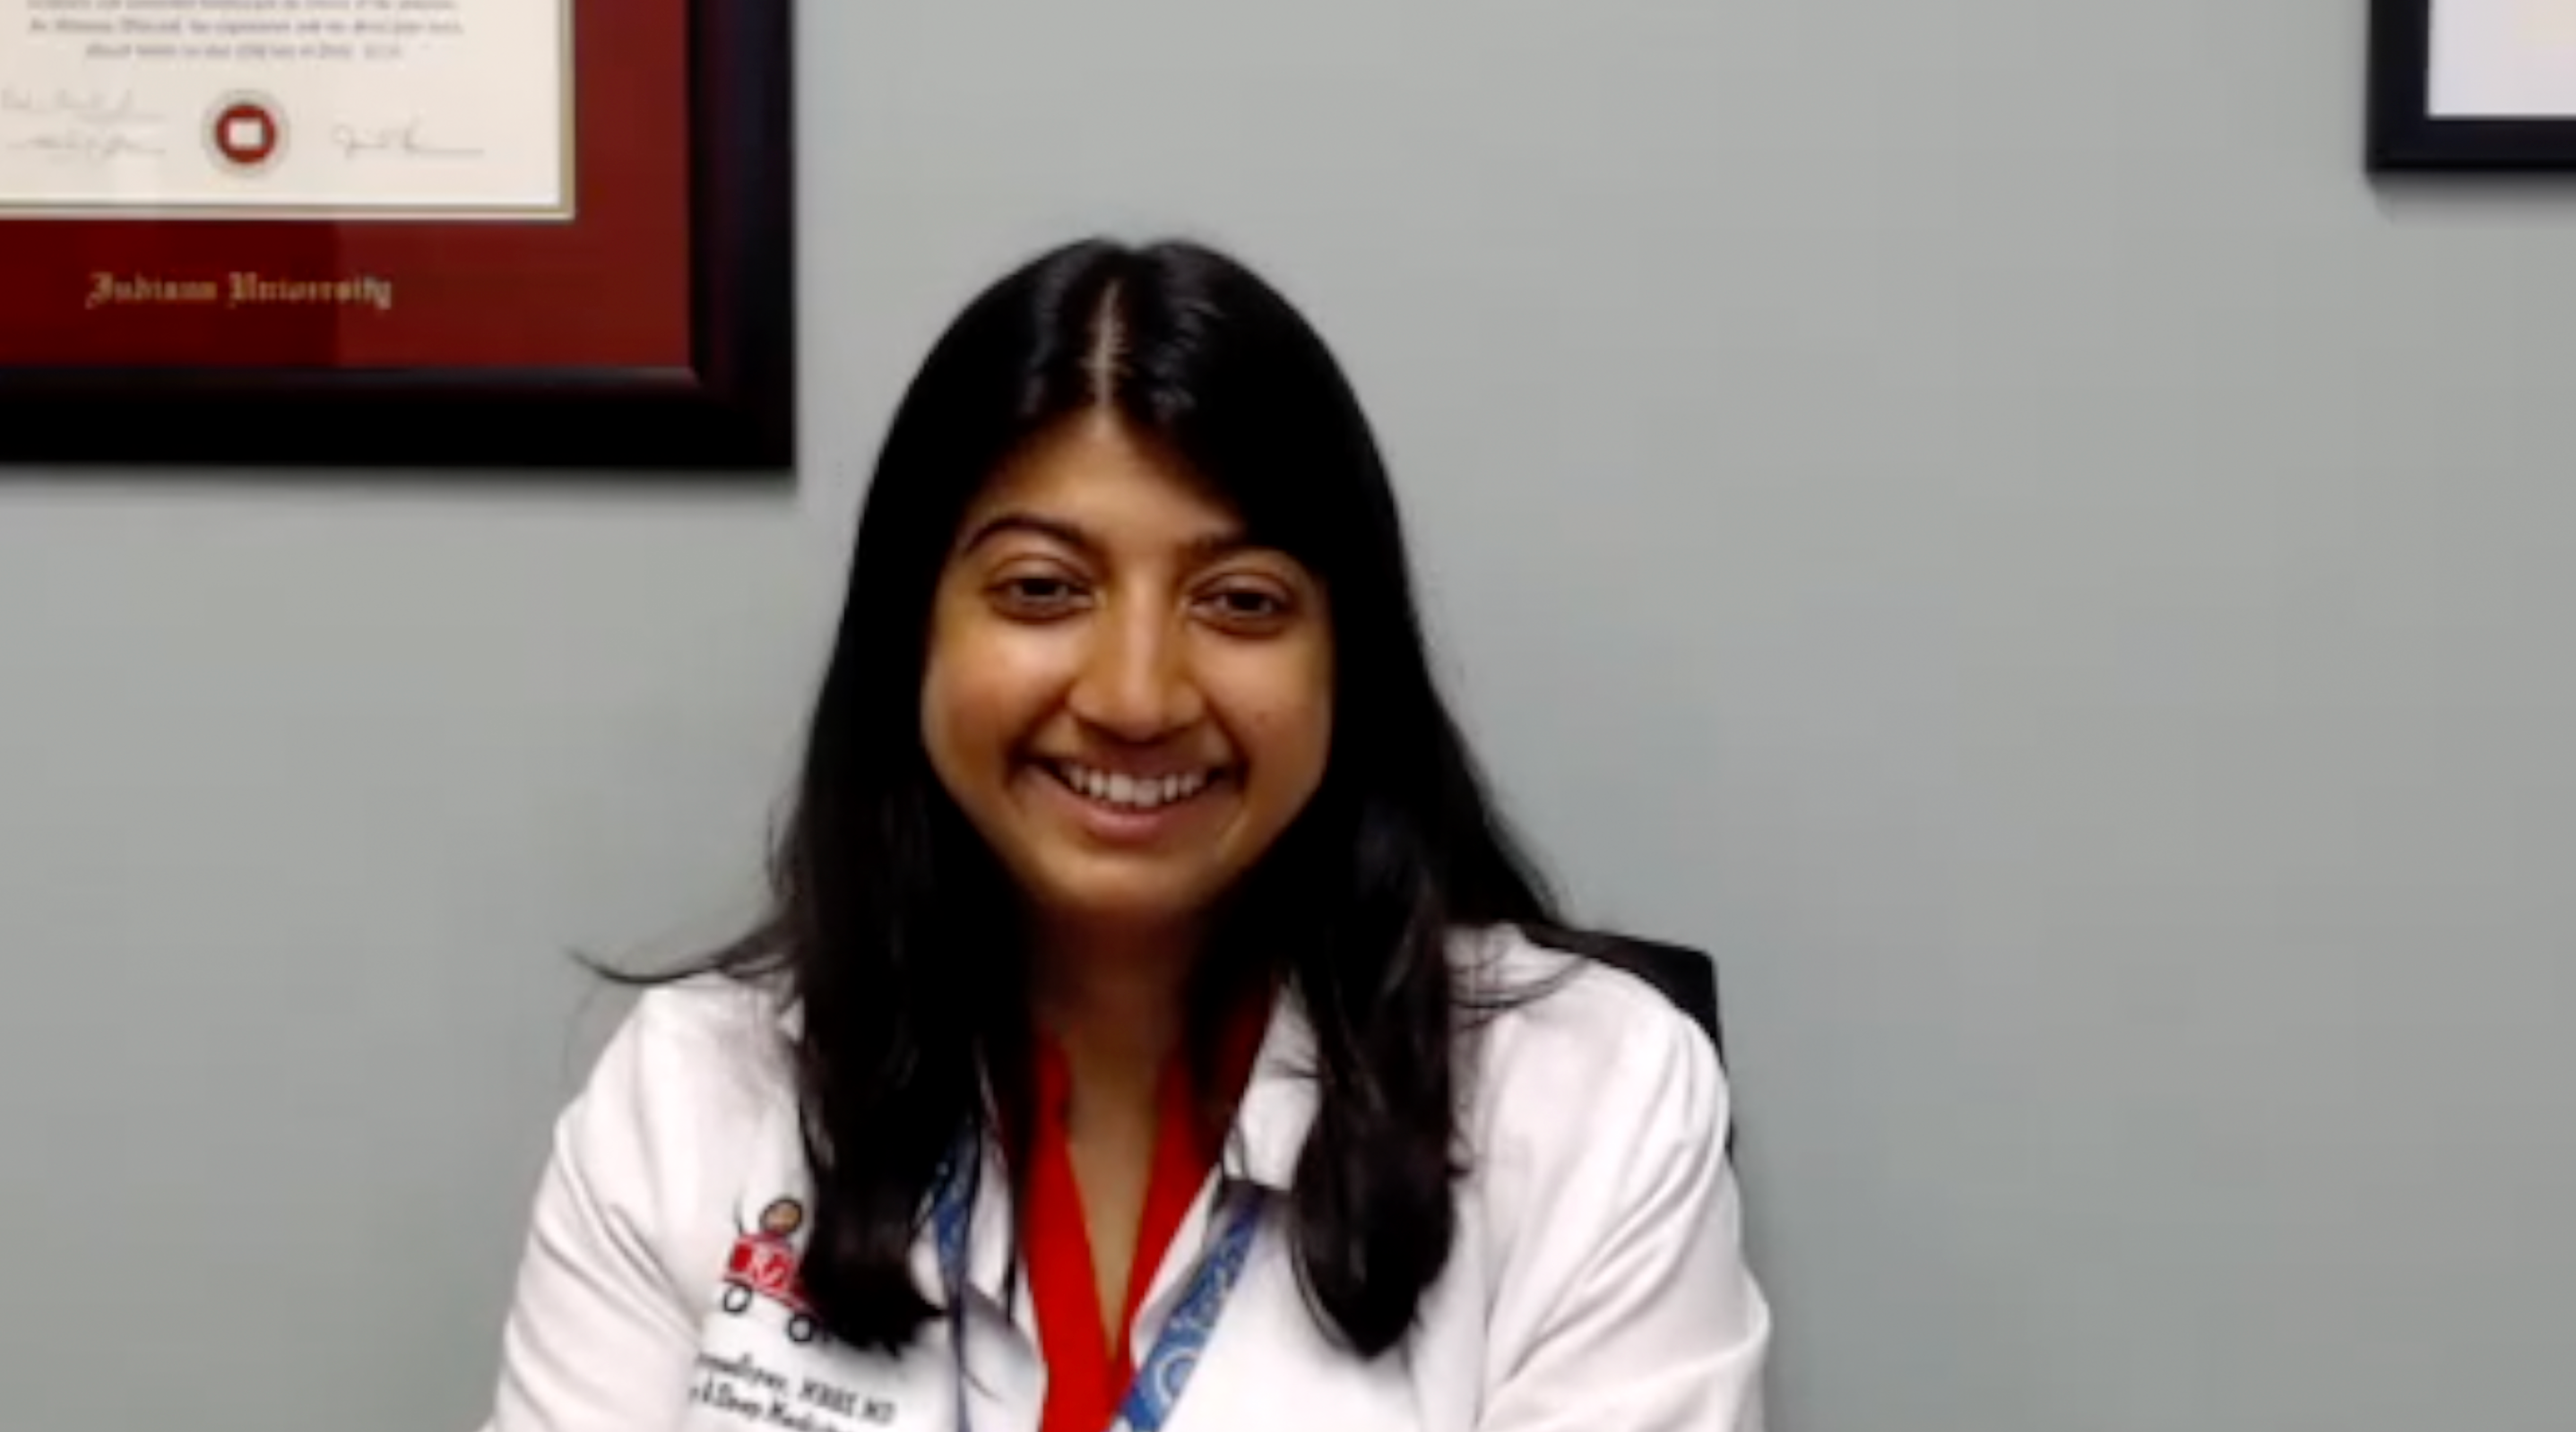 AI’s Potential to Help Improve Insomnia Care: Anuja Bandyopadhyay, MD